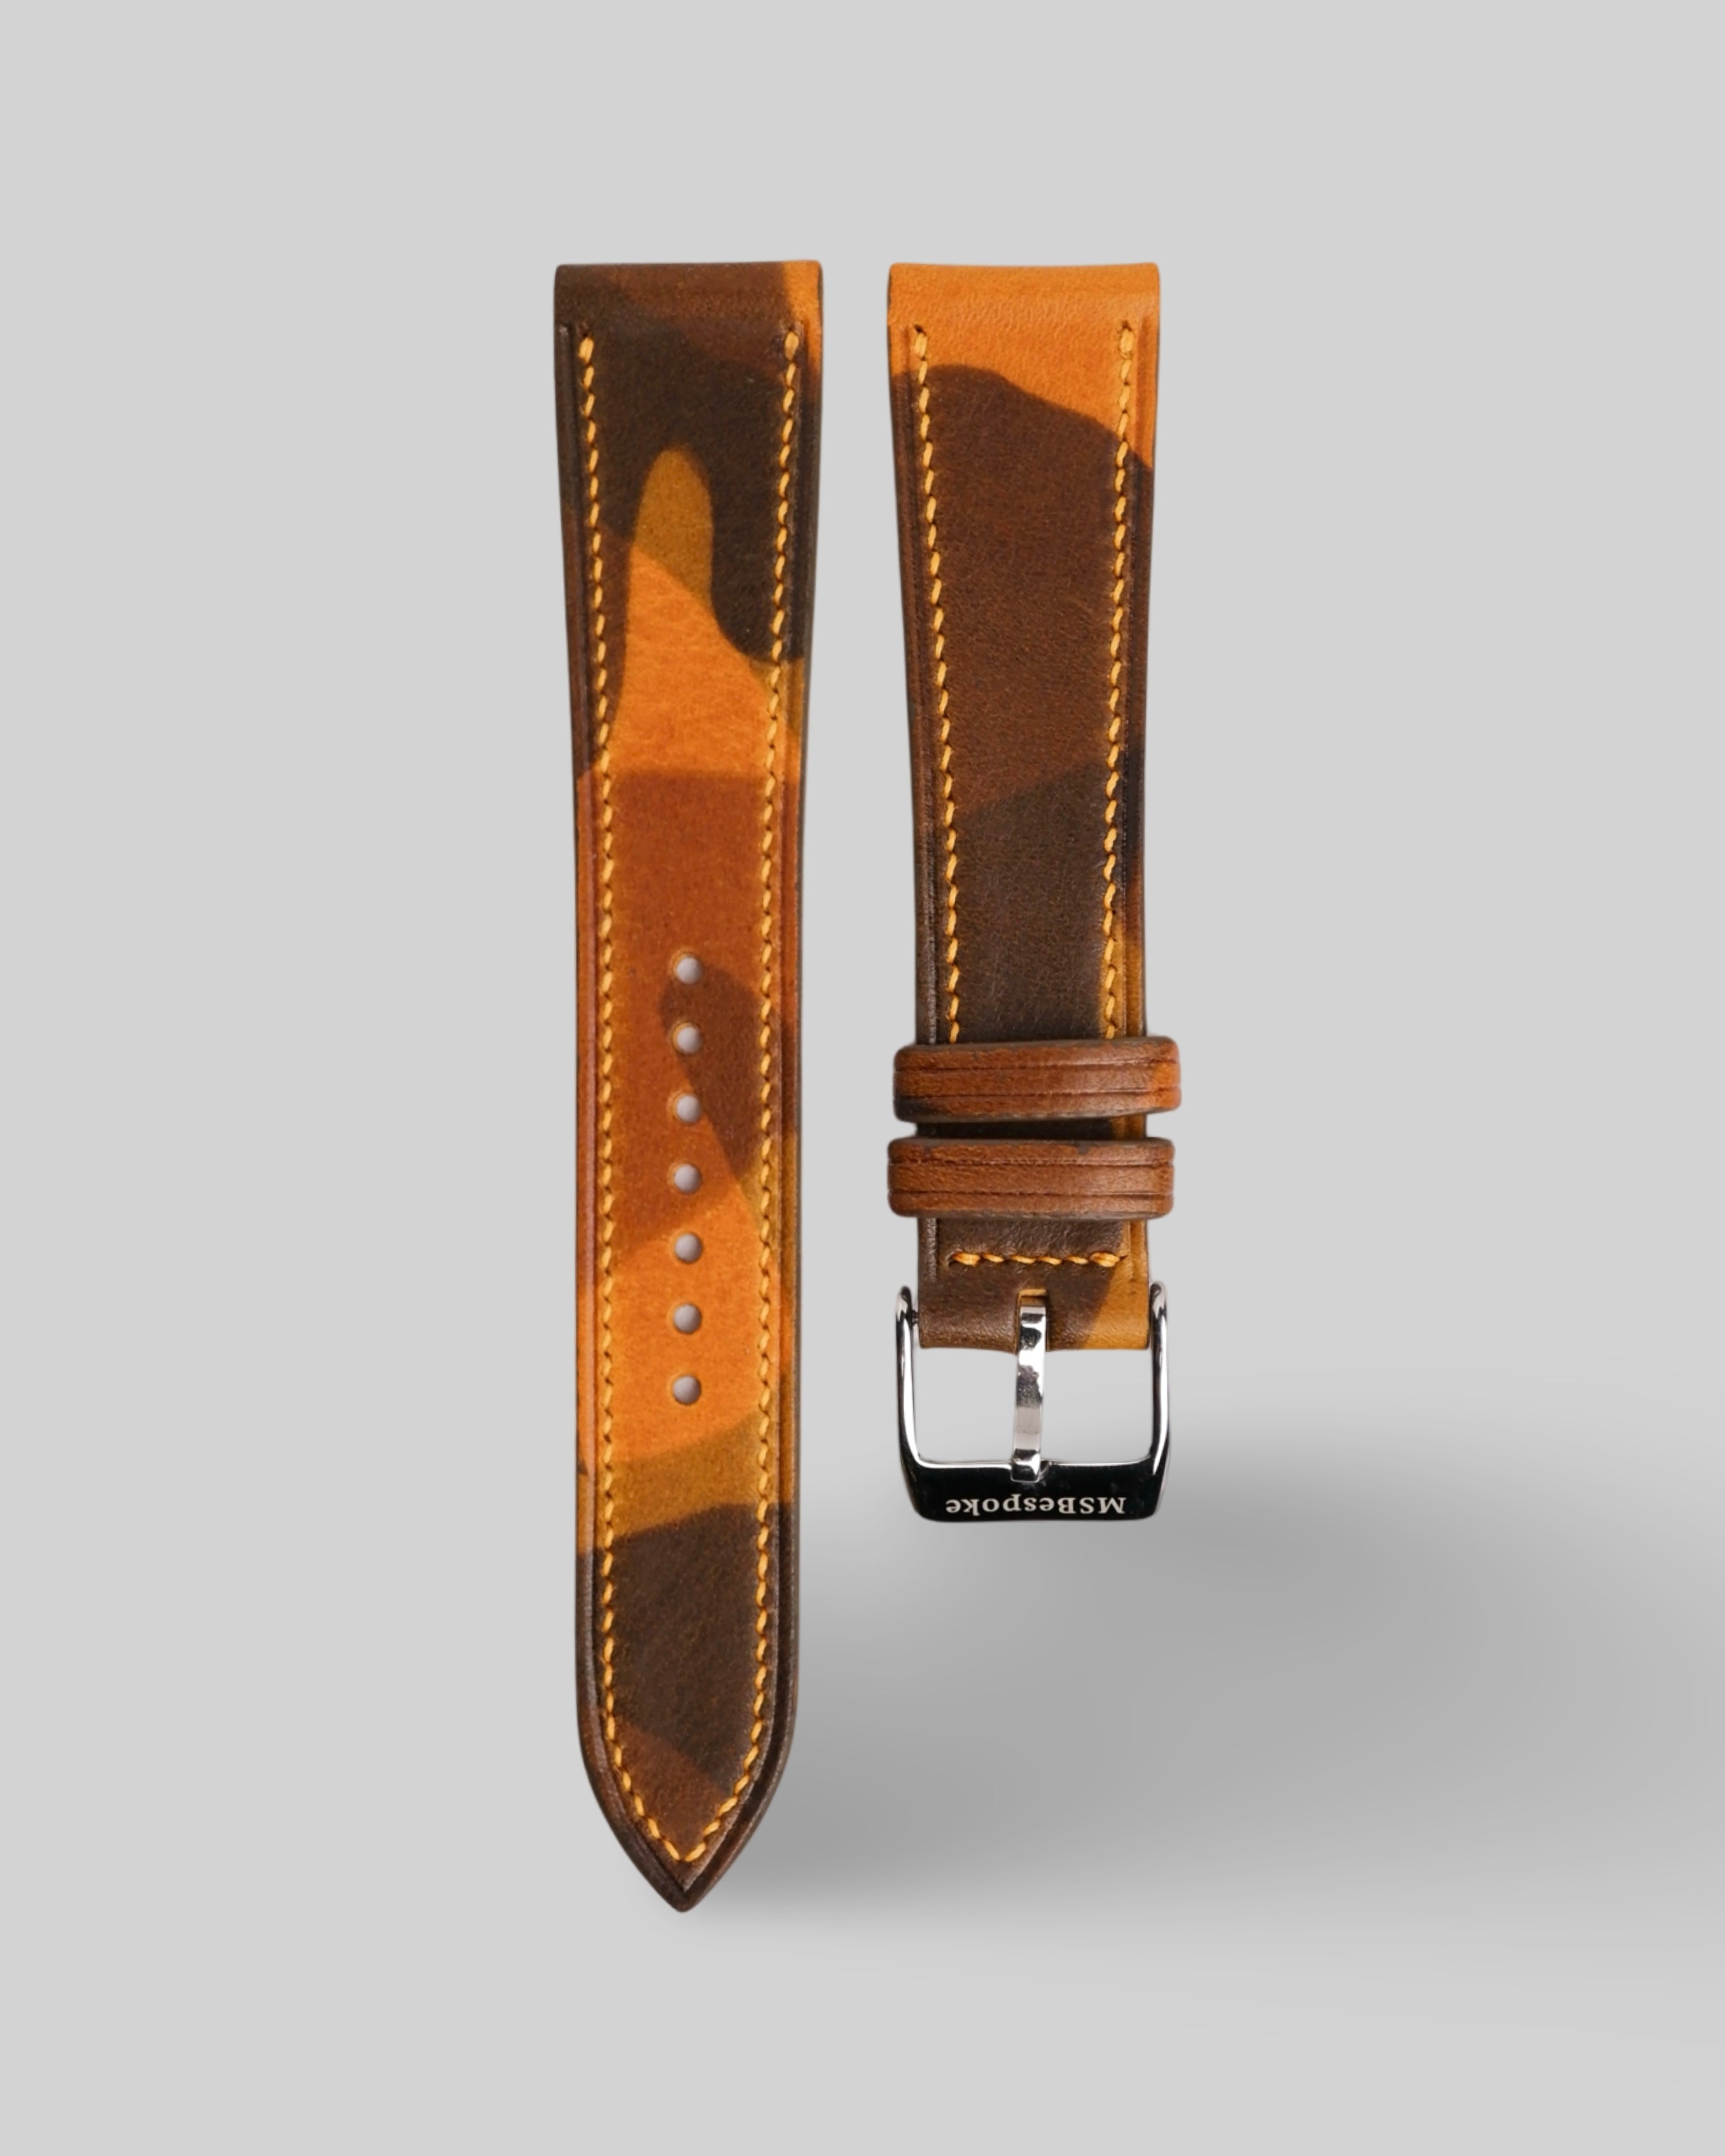 Camo Cuoio Leather Watch Strap